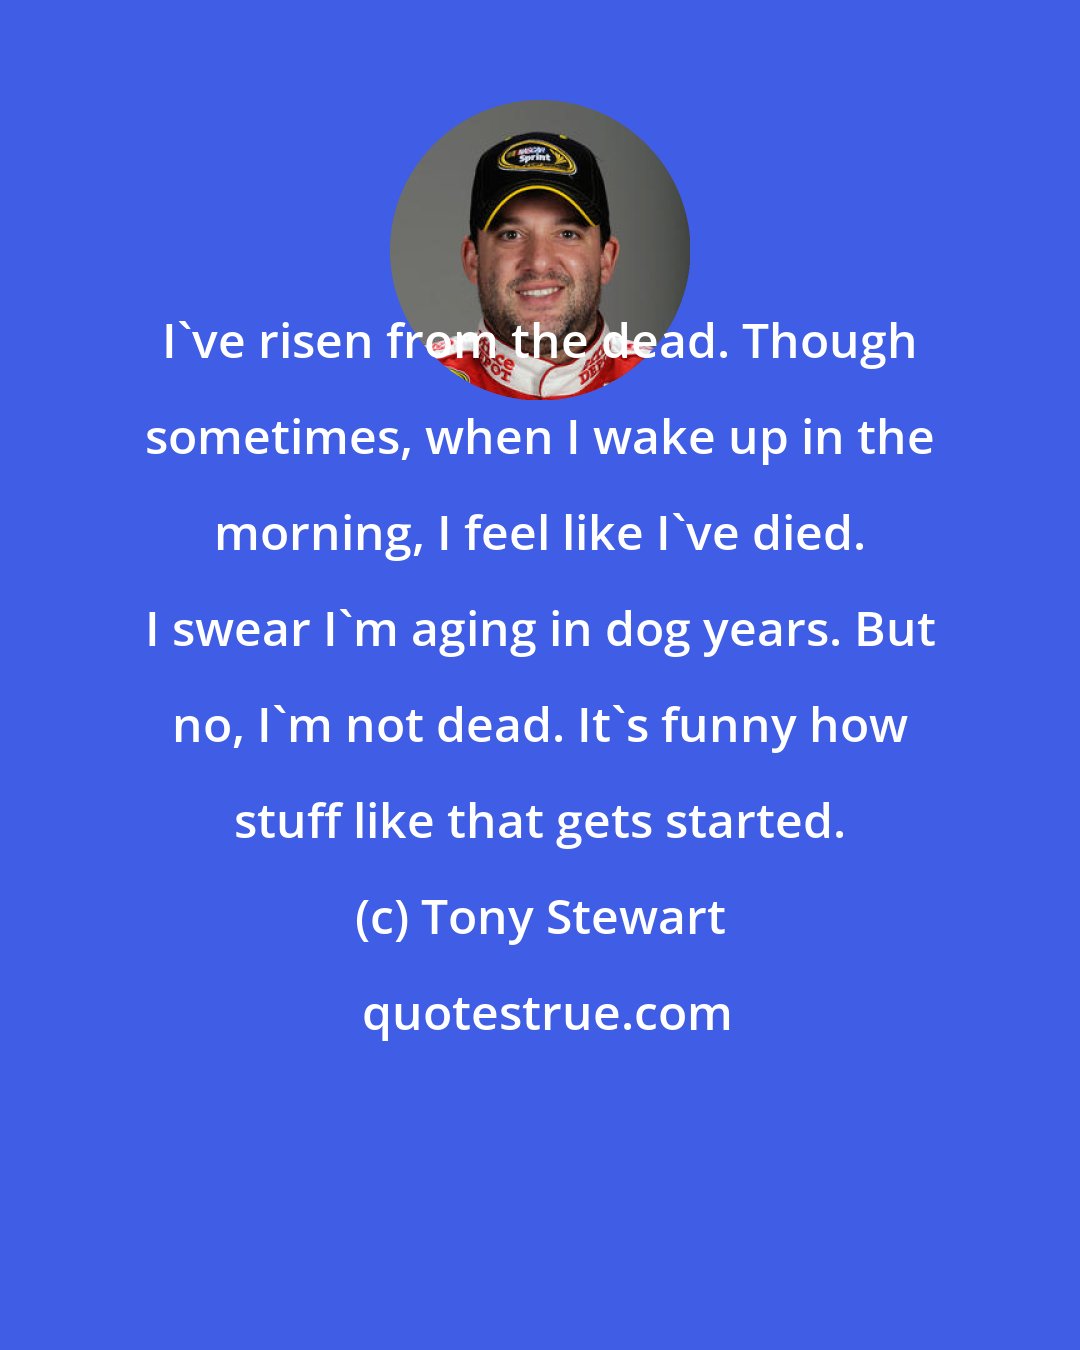 Tony Stewart: I've risen from the dead. Though sometimes, when I wake up in the morning, I feel like I've died. I swear I'm aging in dog years. But no, I'm not dead. It's funny how stuff like that gets started.